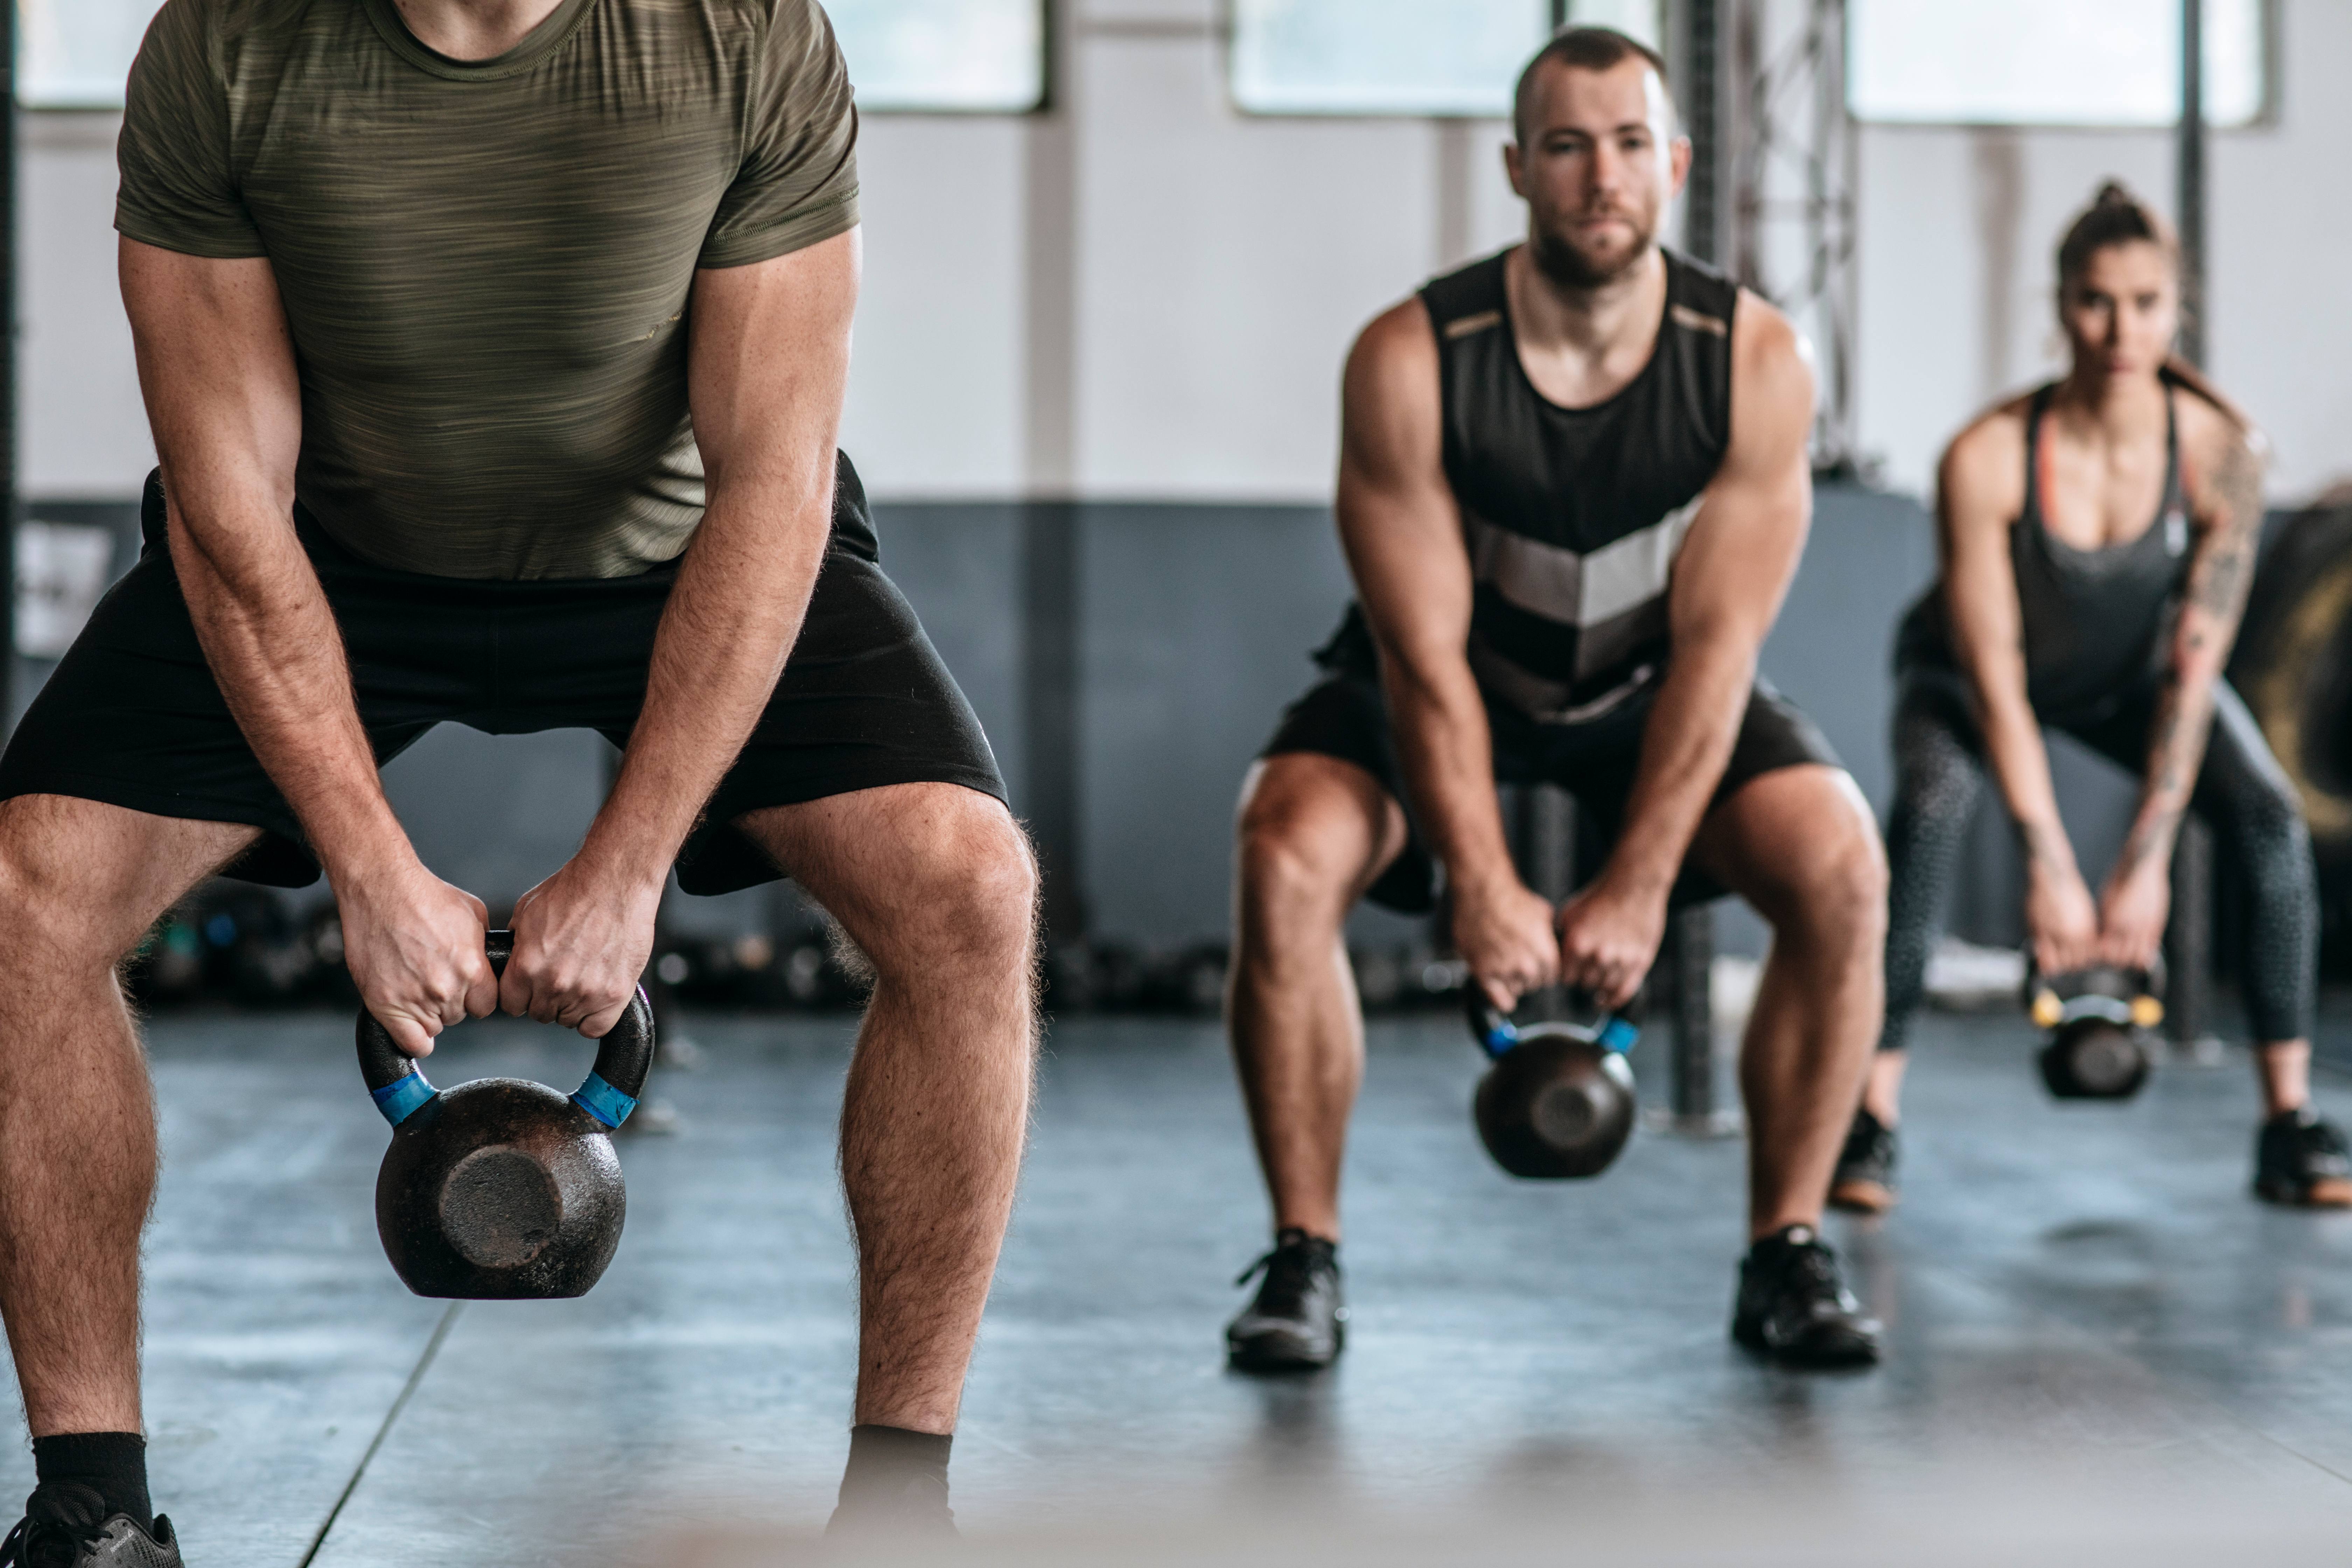 Group of people lifting kettlebells at gym